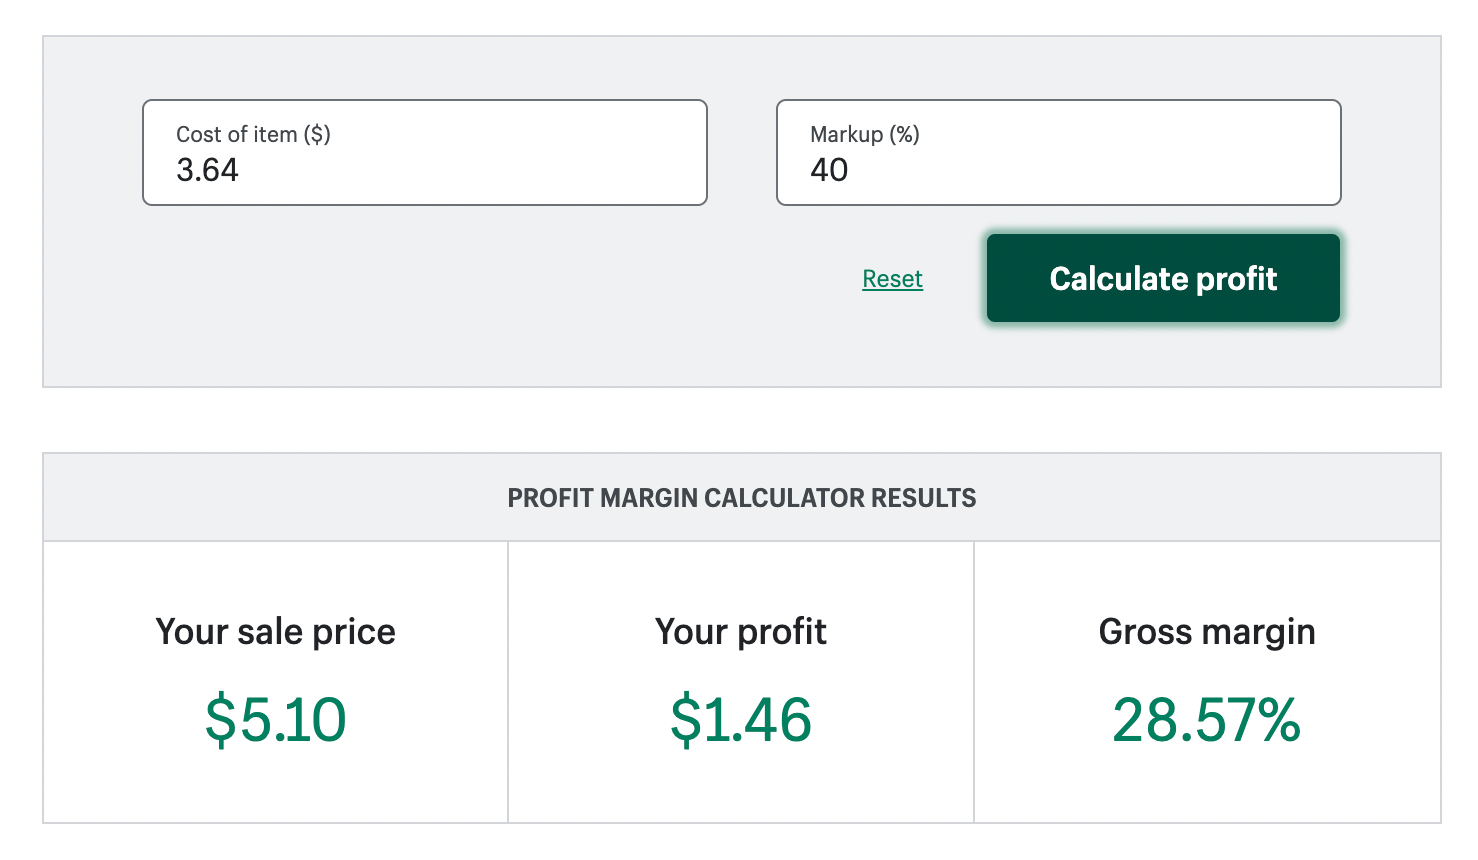 Calculator showing how a $3.64 item with a 40% markup gives the retailer $1.46 in profit.